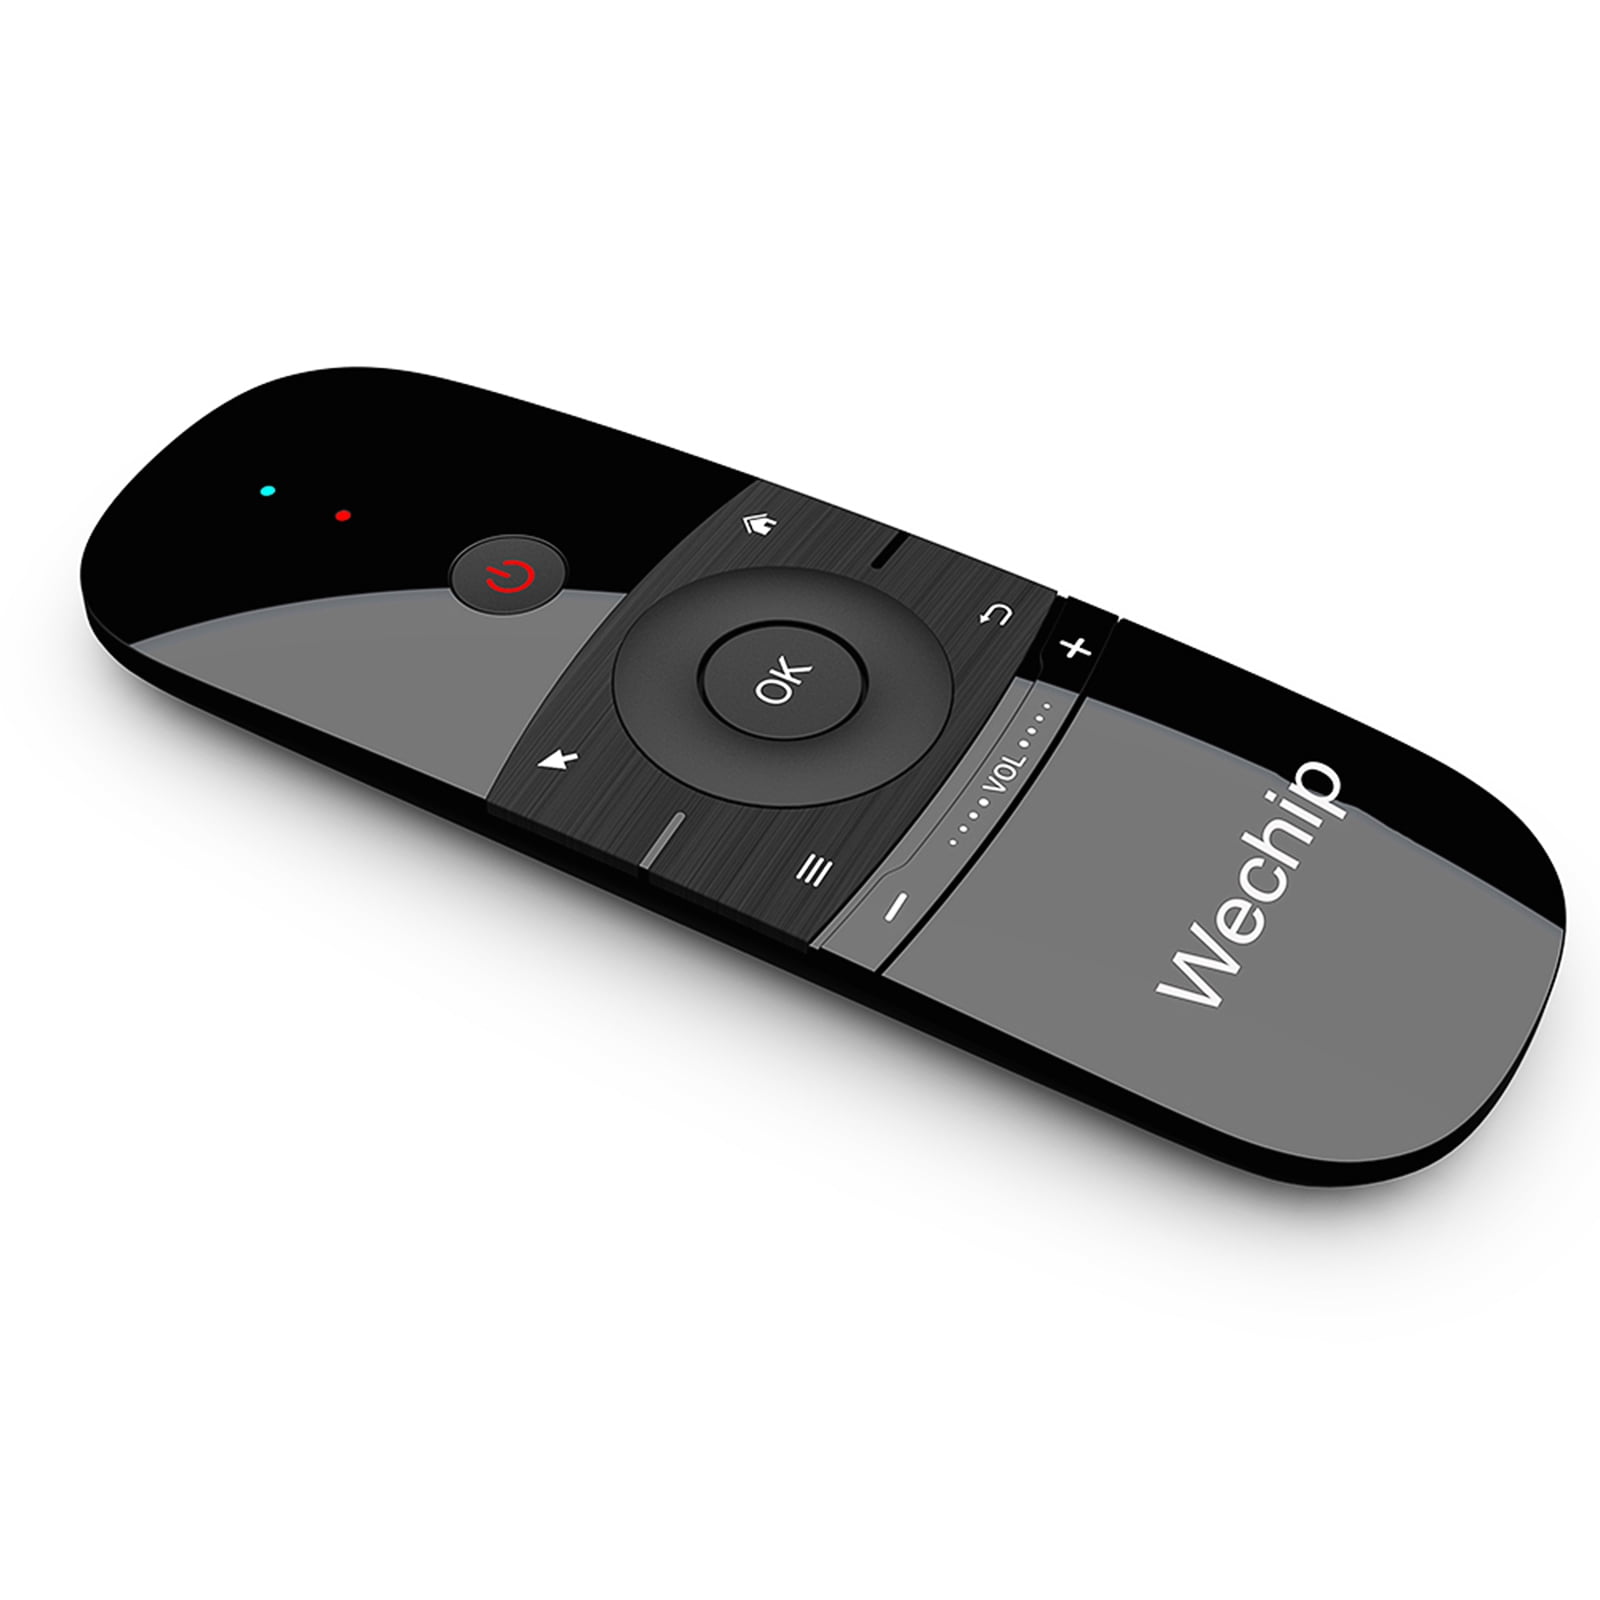 Wechip W1 2.4G Air Mouse Wireless Keyboard Remote Control Infrared Remote Learning 6-Axis Motion Sense w/ Receiver for TV -